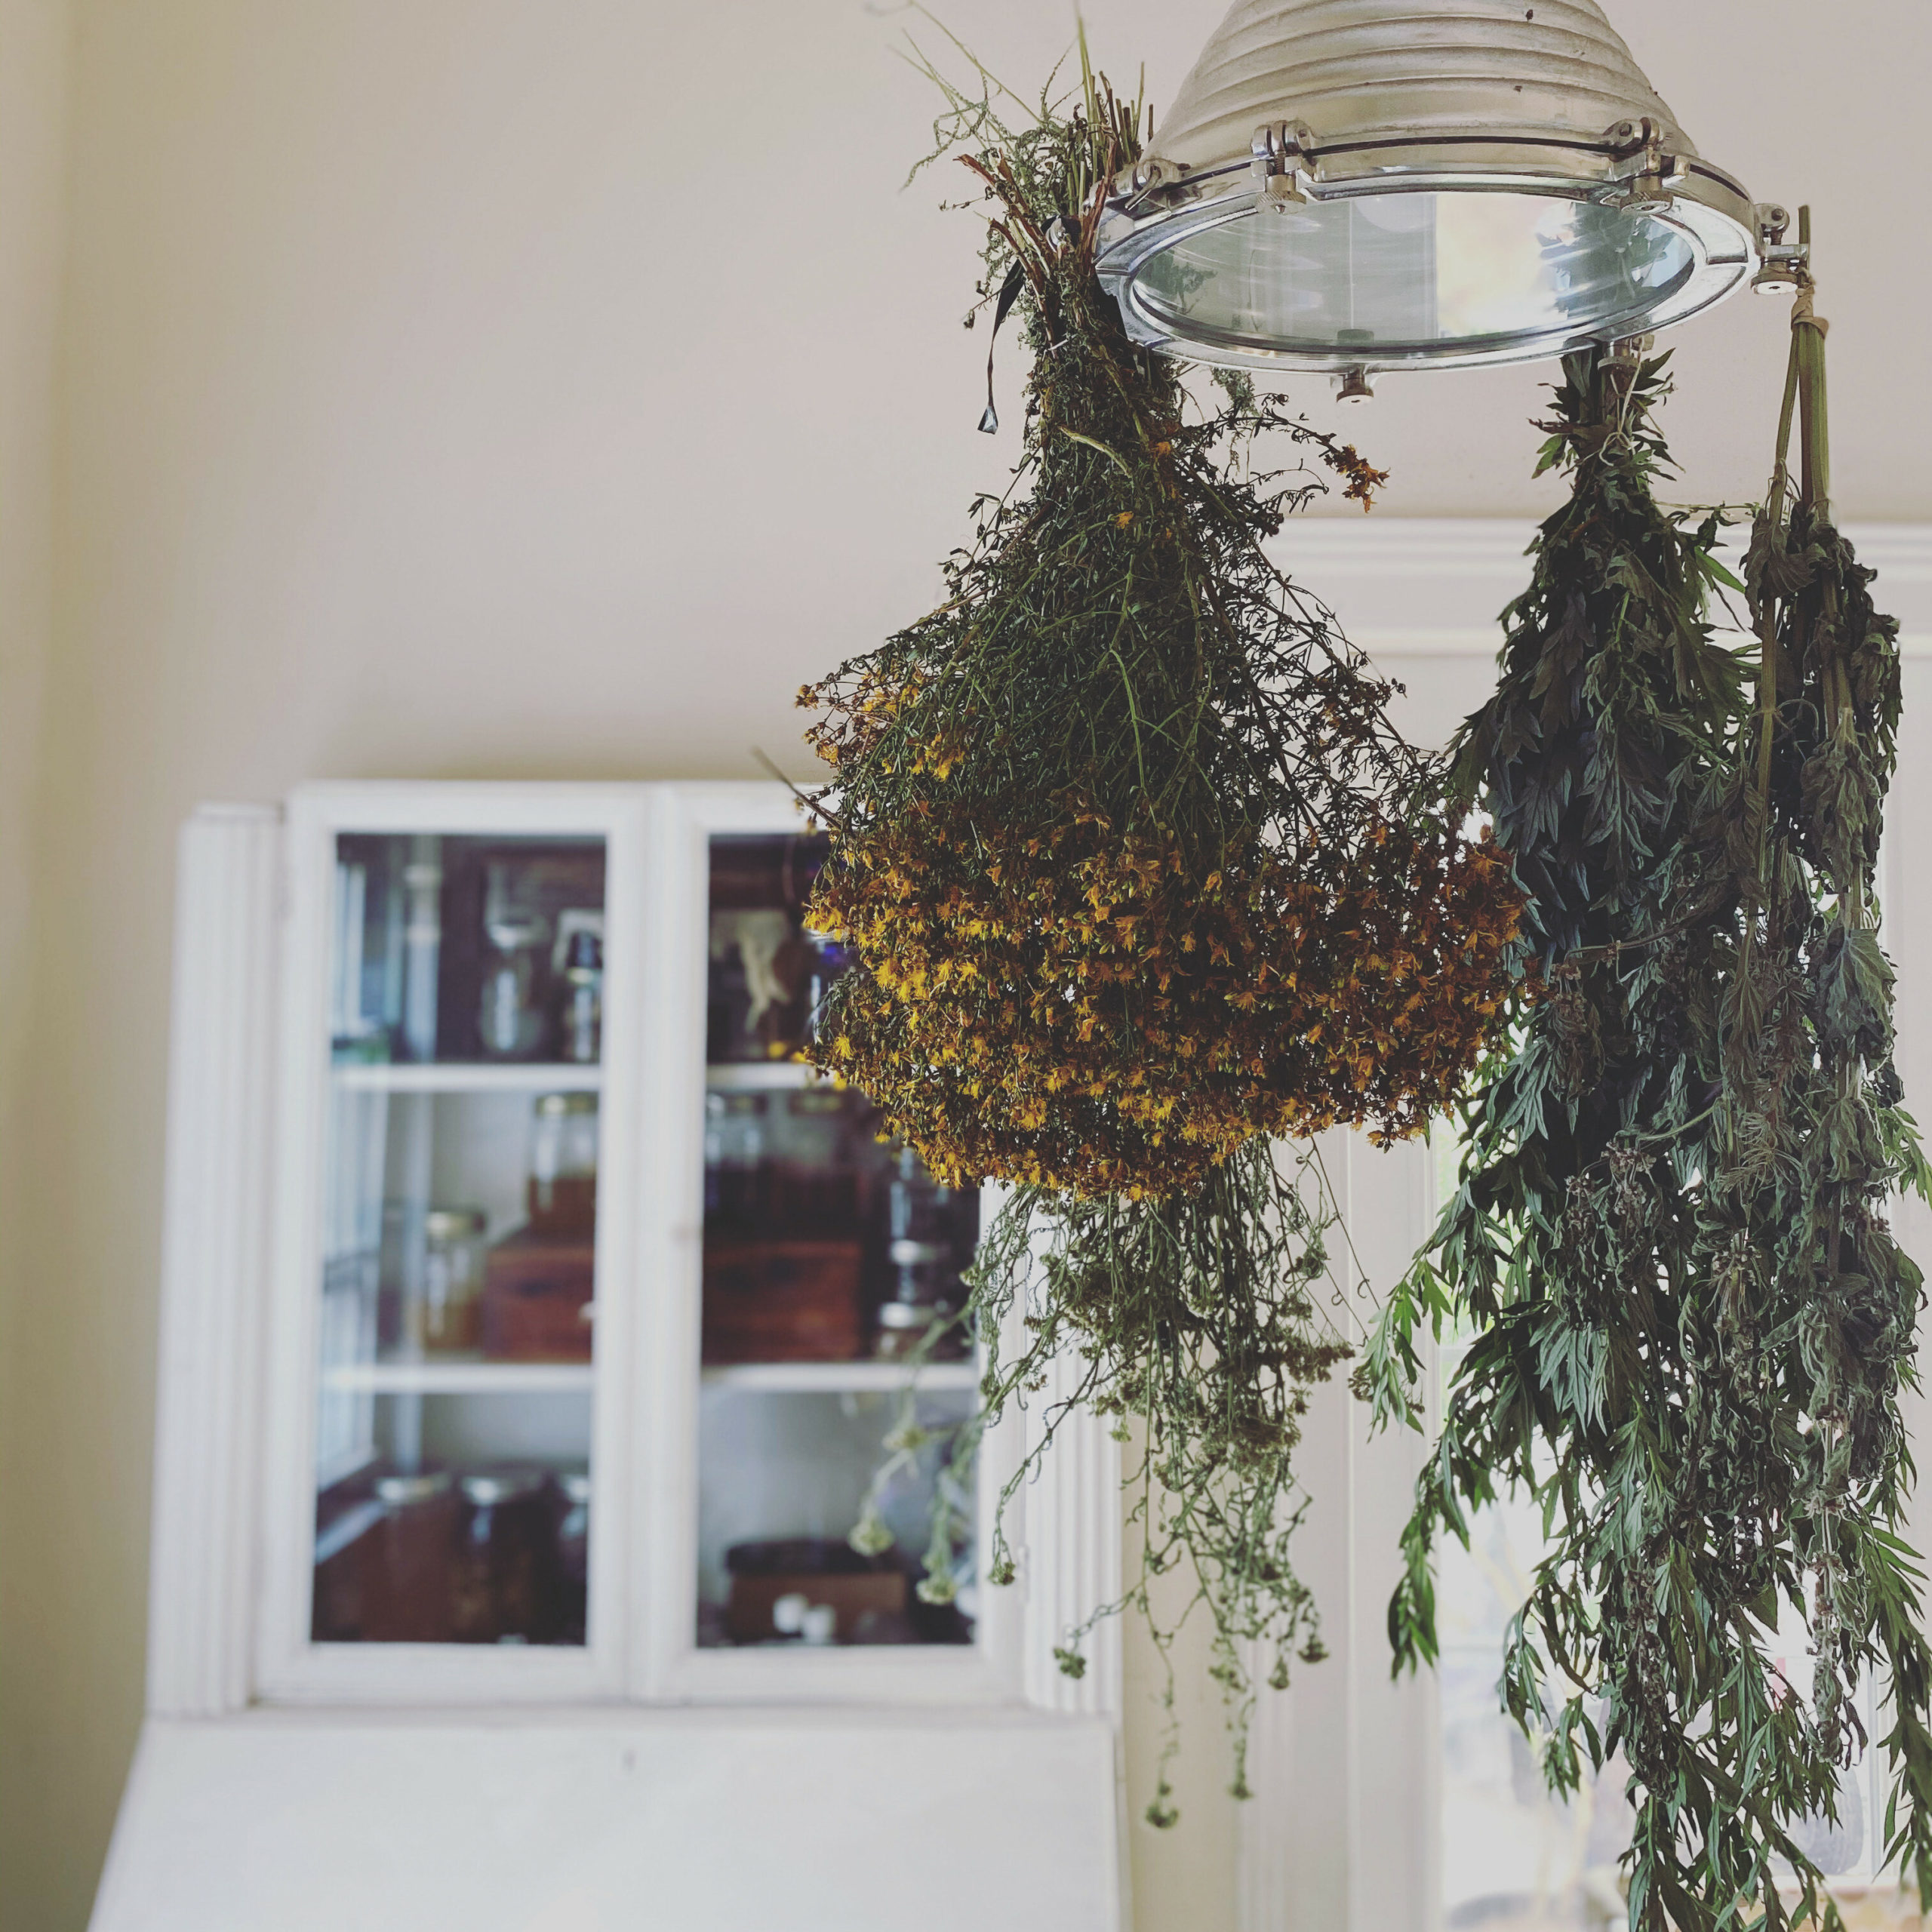 Drying herbs for Living Wild on Long Island.